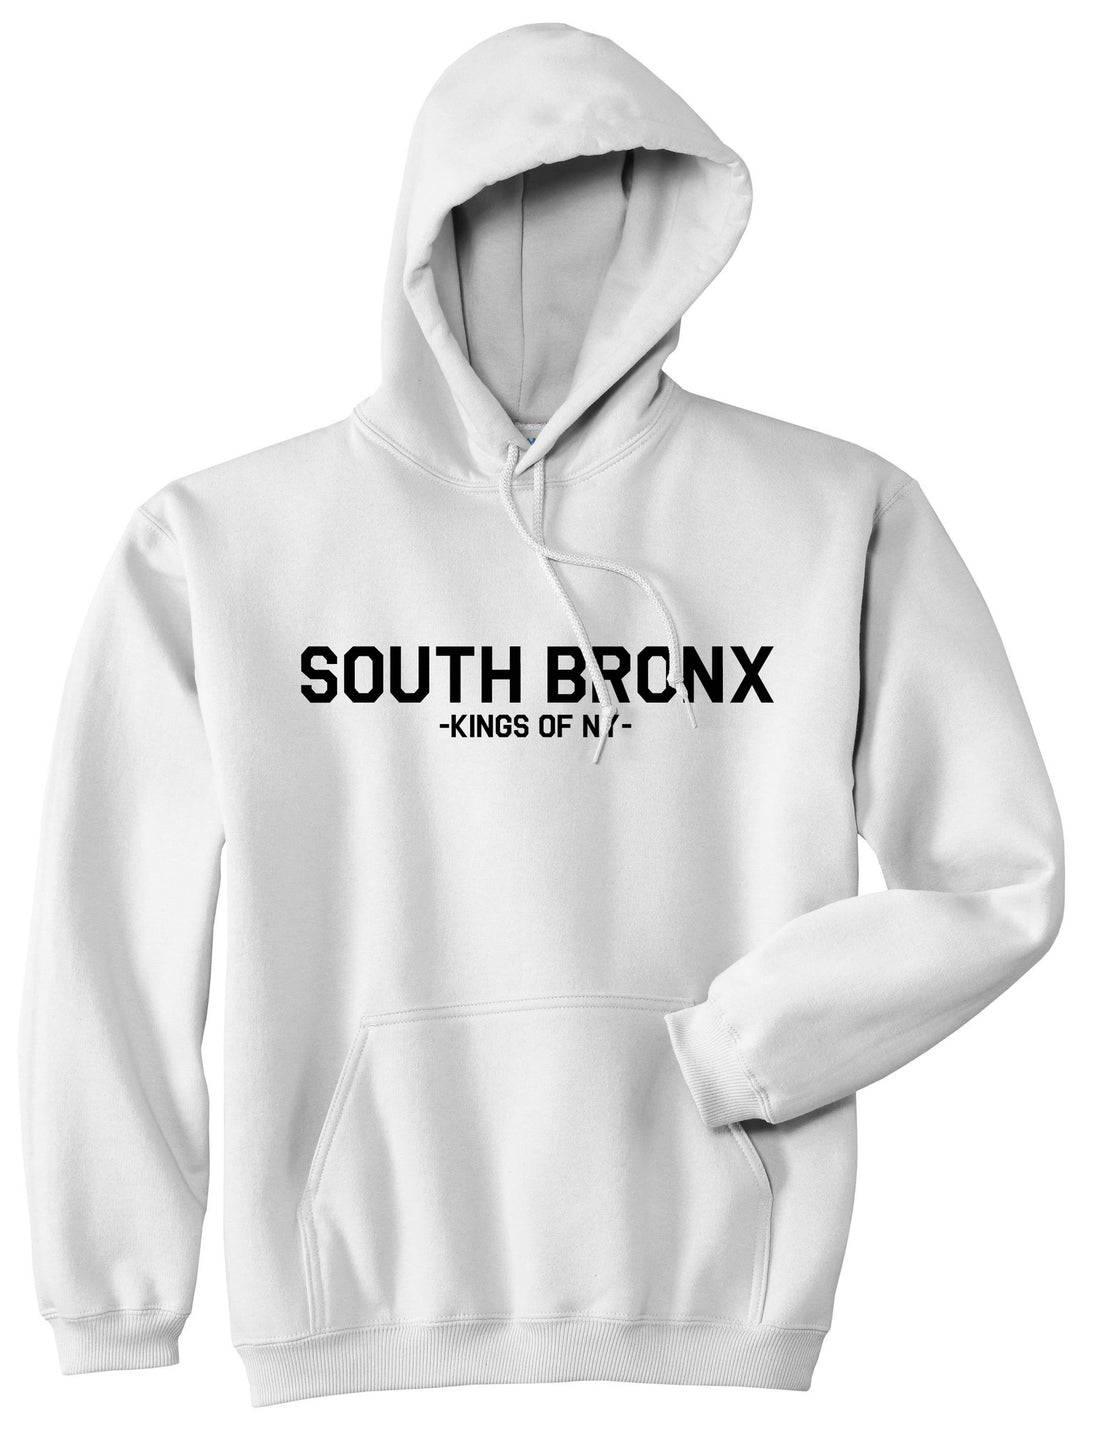 South Bronx BX New York Pullover Hoodie Hoody in White